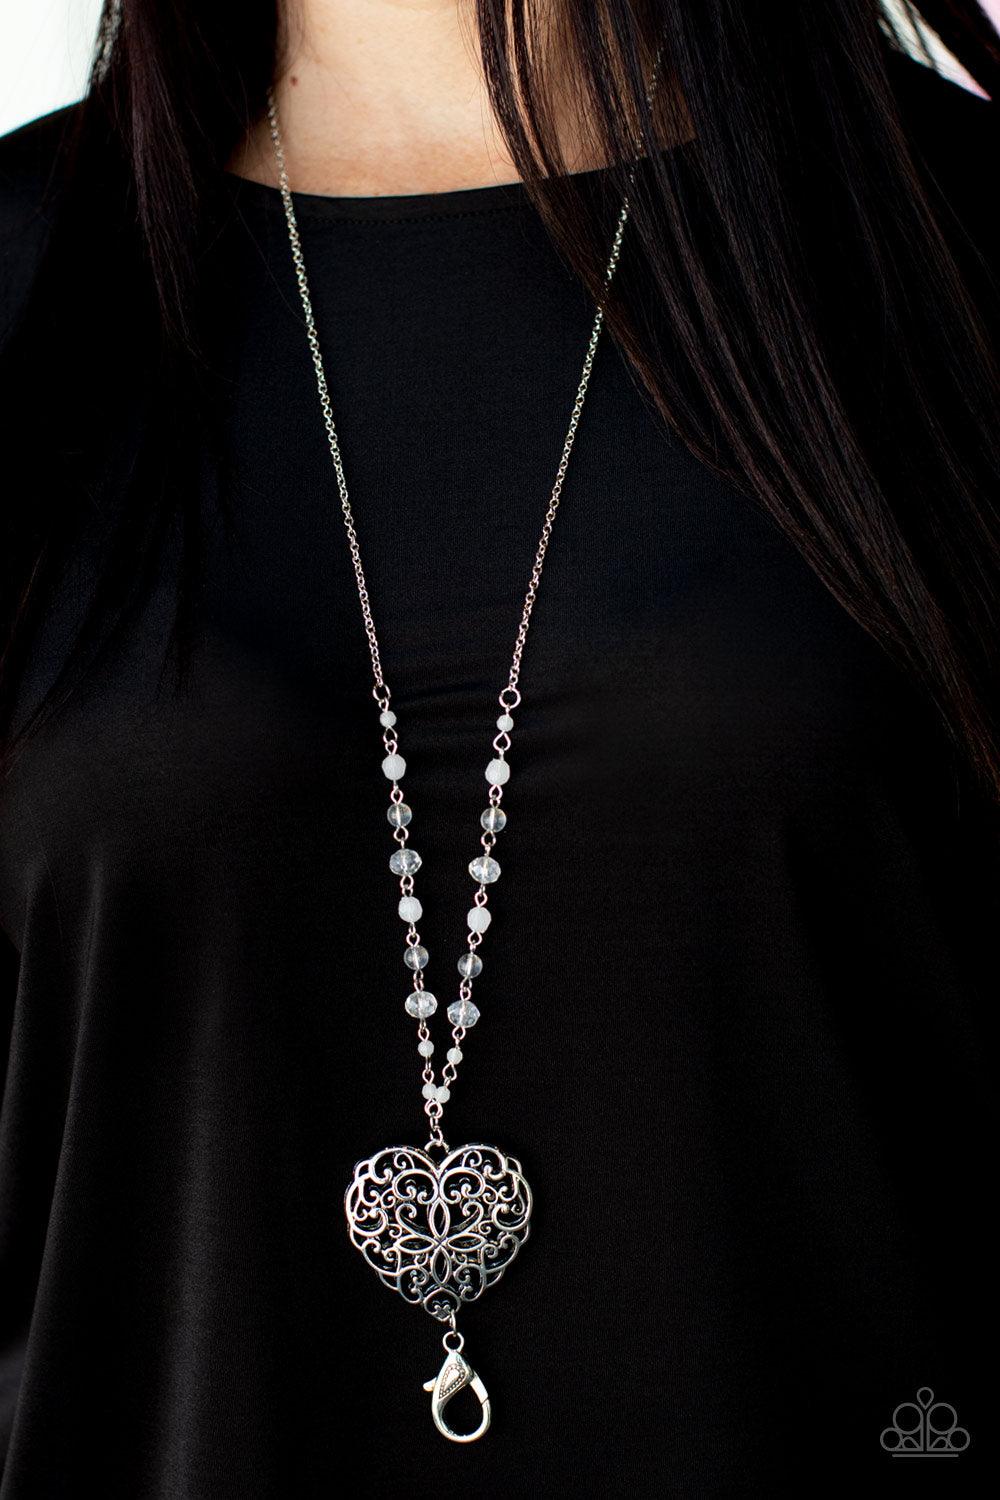 Paparazzi Accessories Doting Devotion - White *Lanyard A dainty collection of opaque, glassy, and crystal-like beads give way to an oversized filigree filled heart frame, creating an antiqued locket inspired pendant at the bottom of a lengthened silver ch